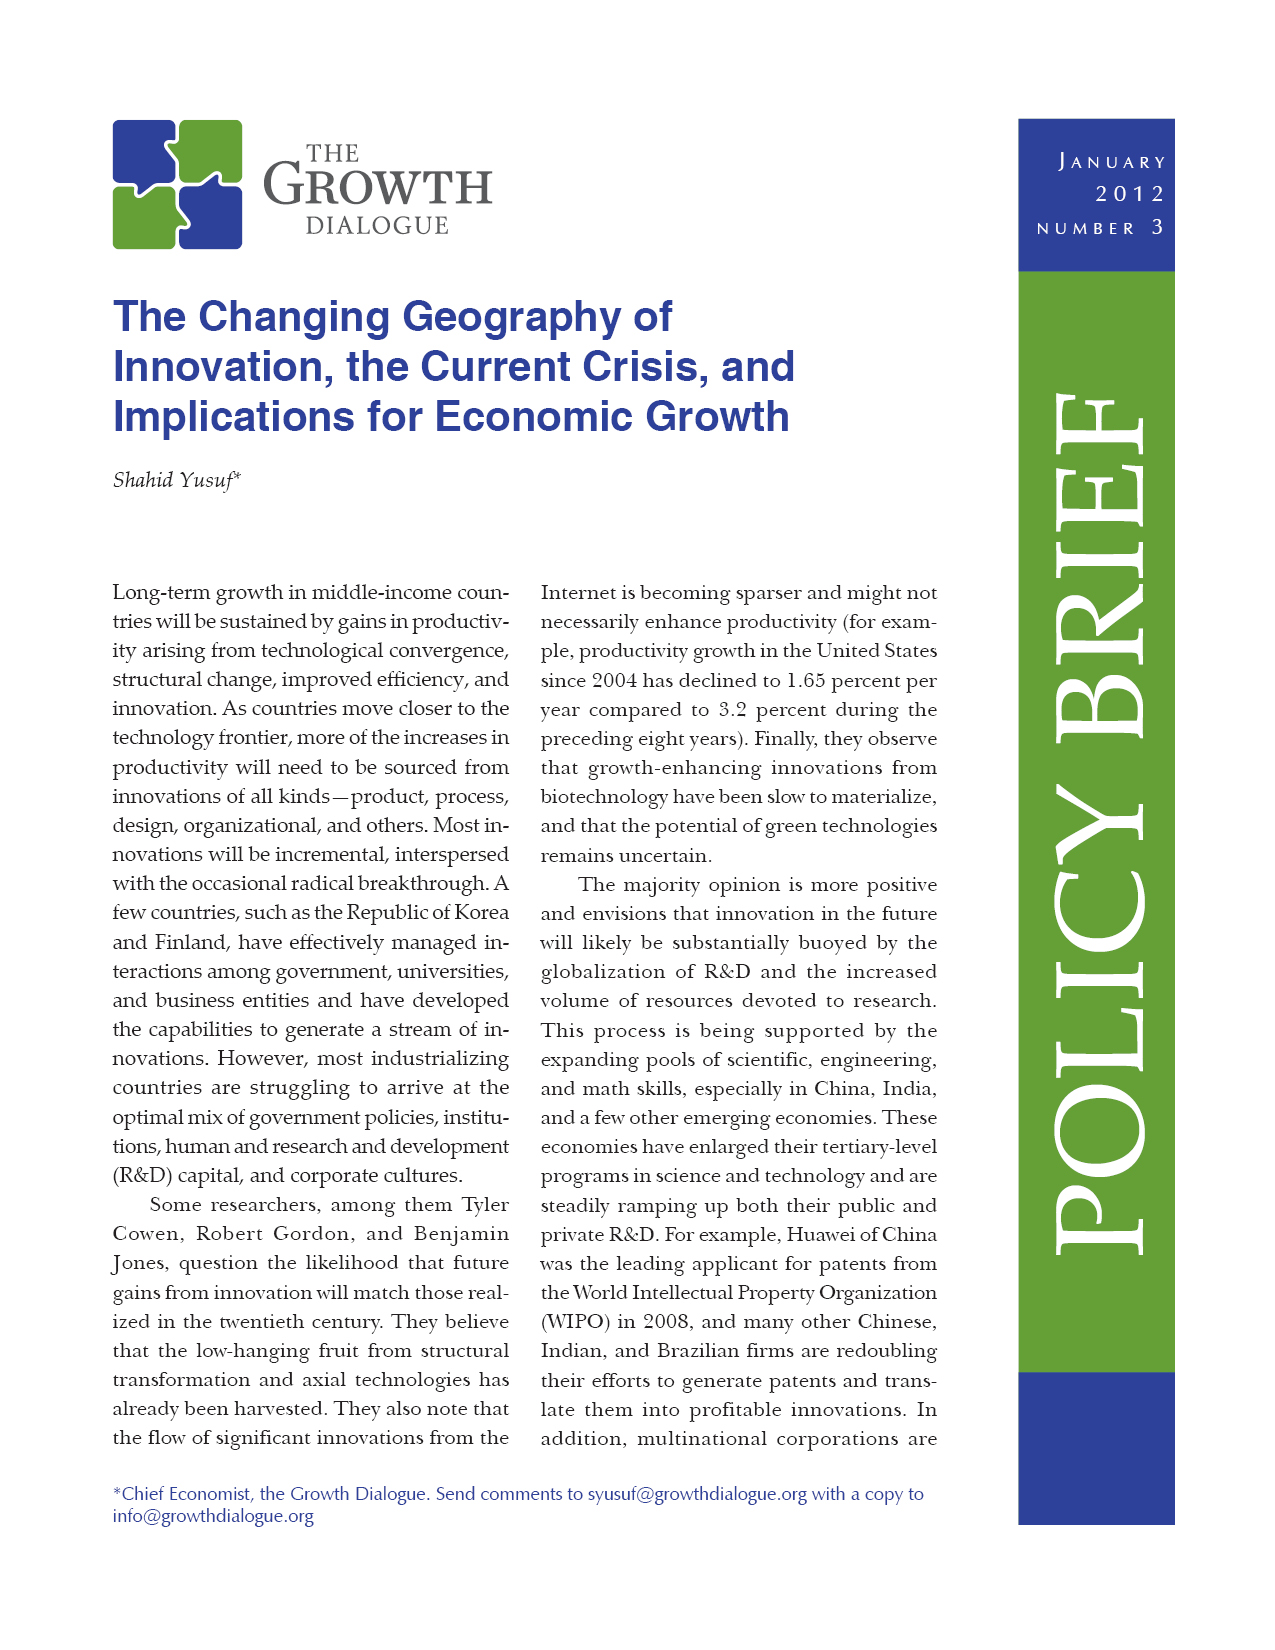 The Changing Geography of Innovation, the Current Crisis and Implications for Economic Growth